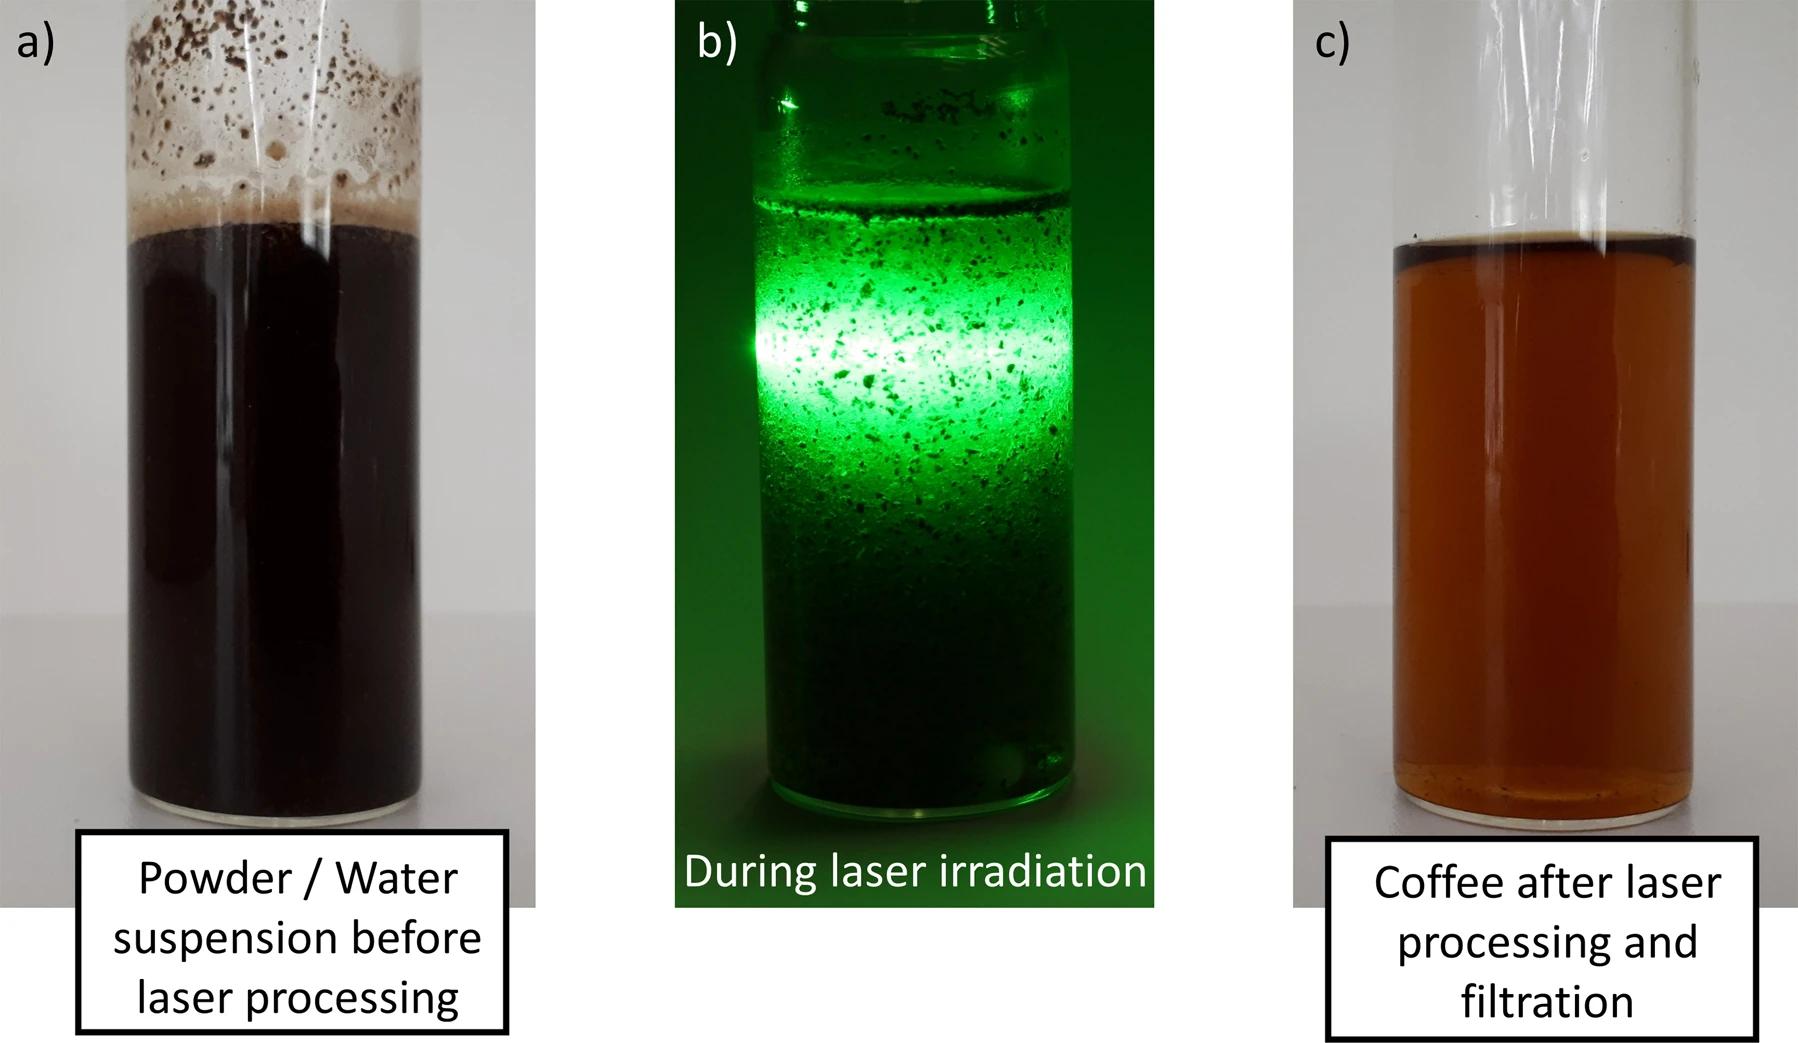 Working image showing coffee before, during and after laser use and filtering.